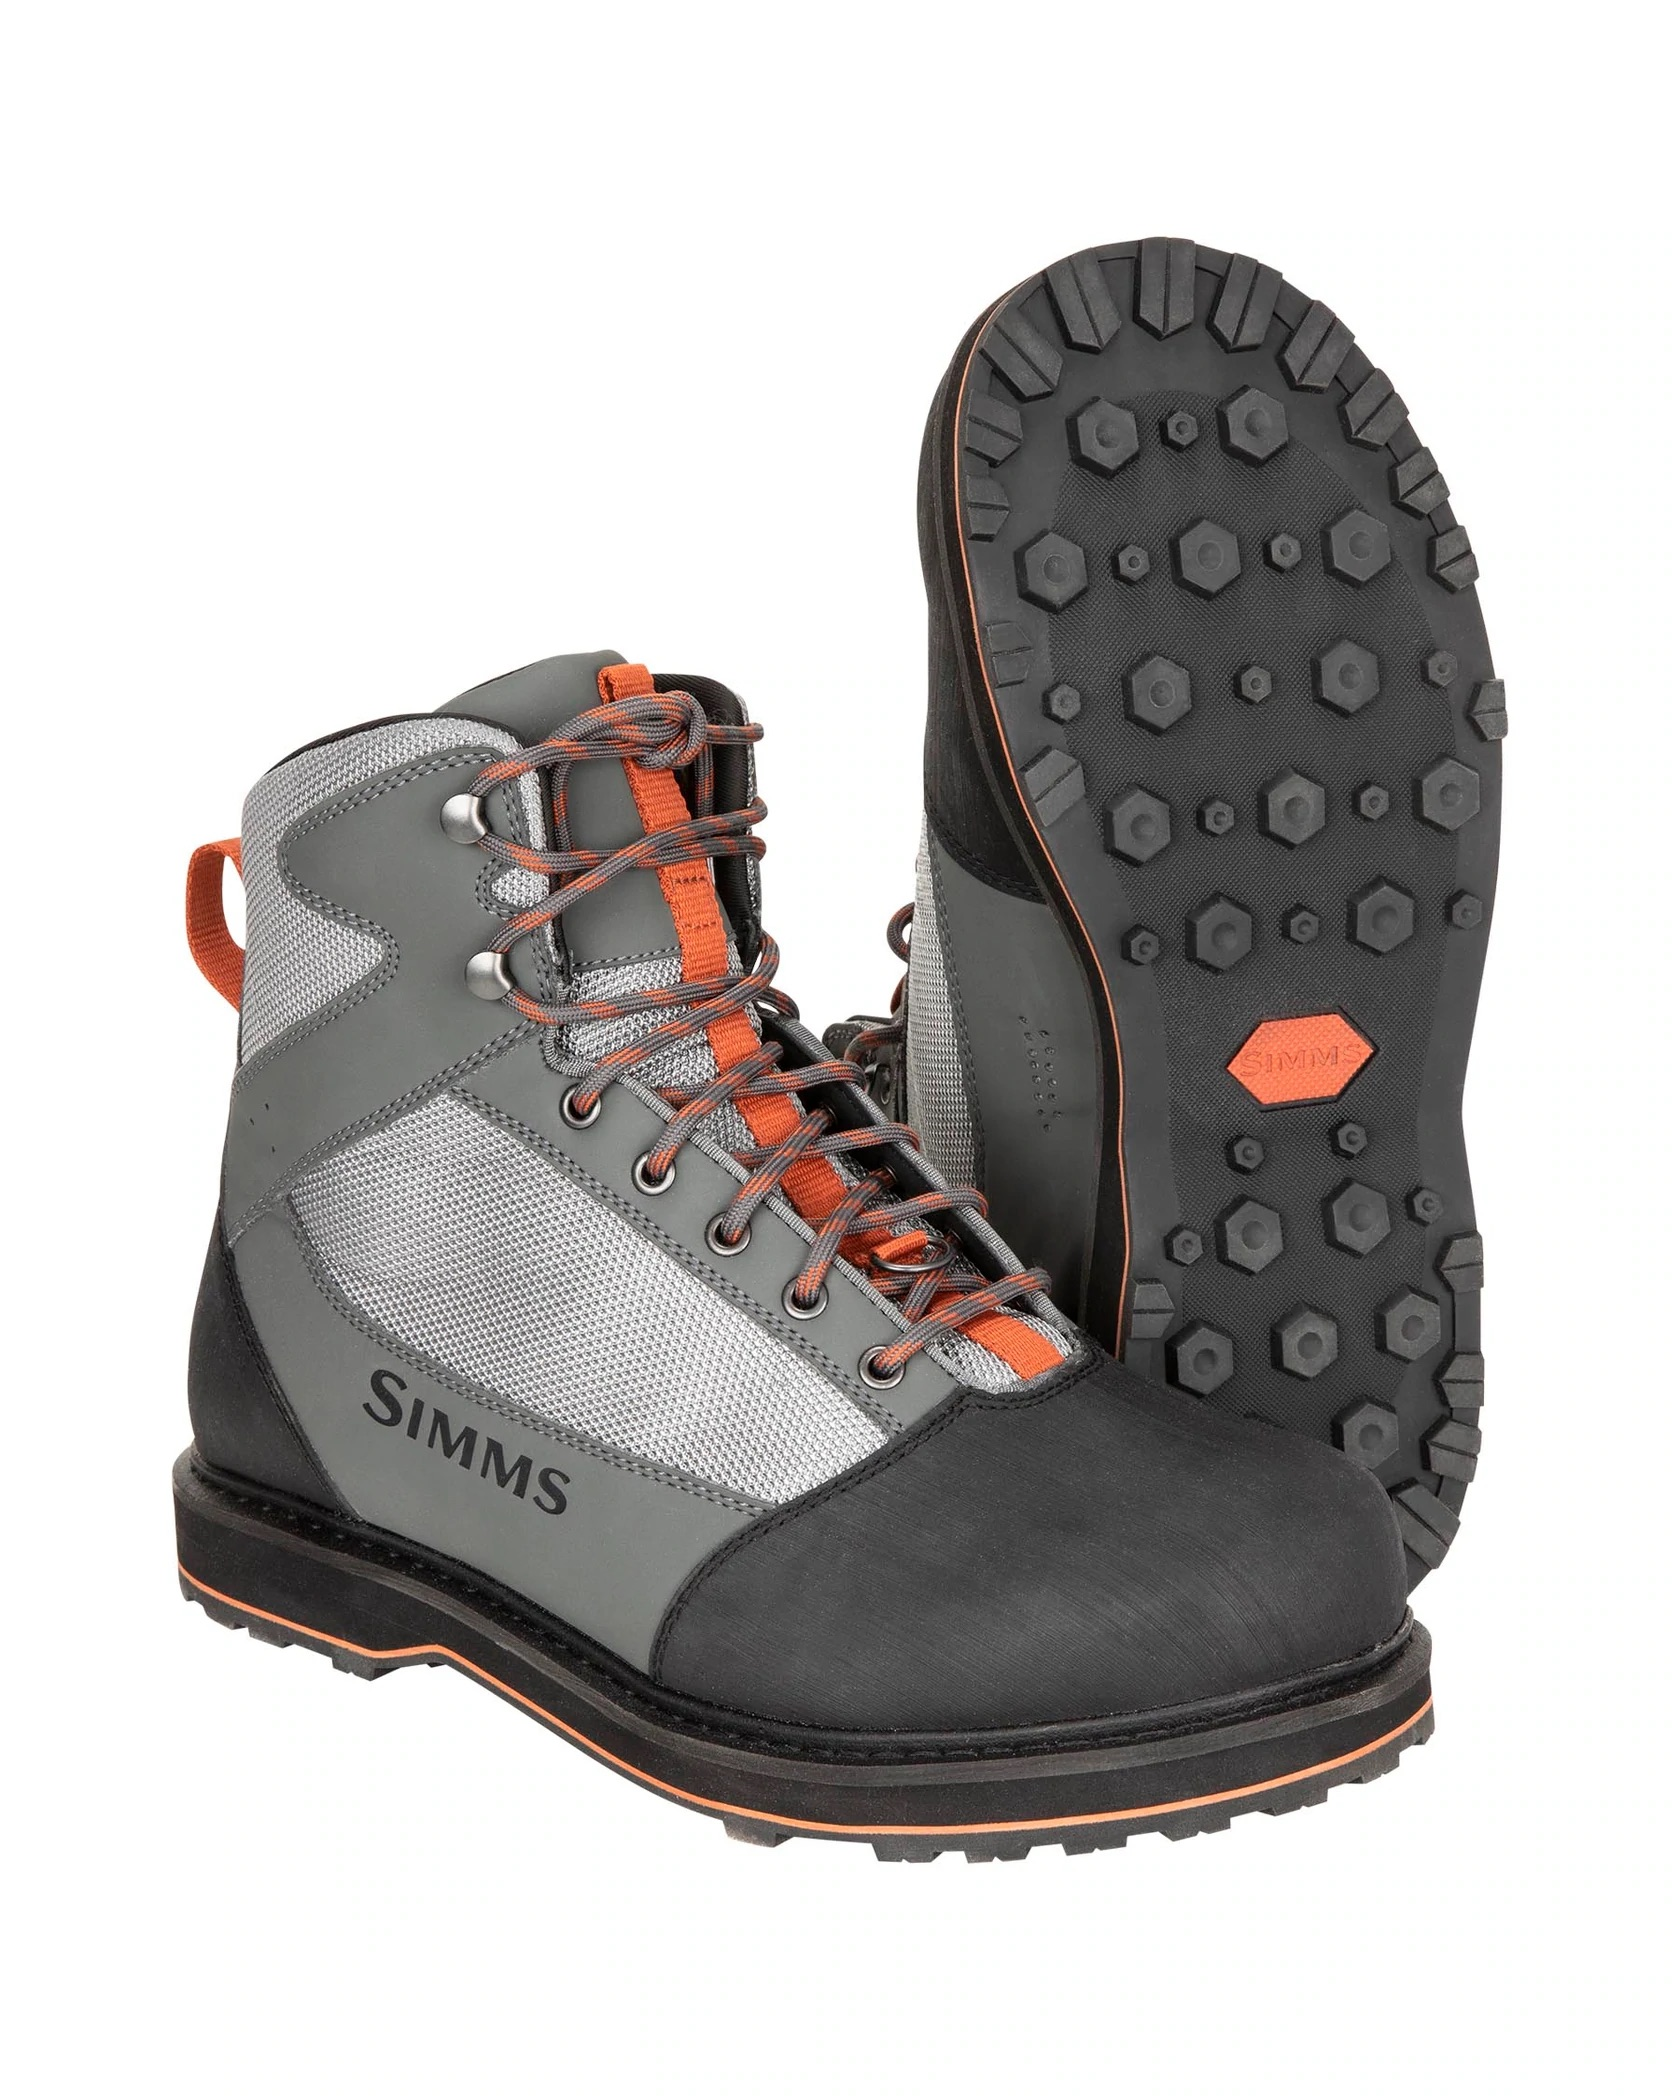 Simms Tributary Boot - Rubber - Size 9